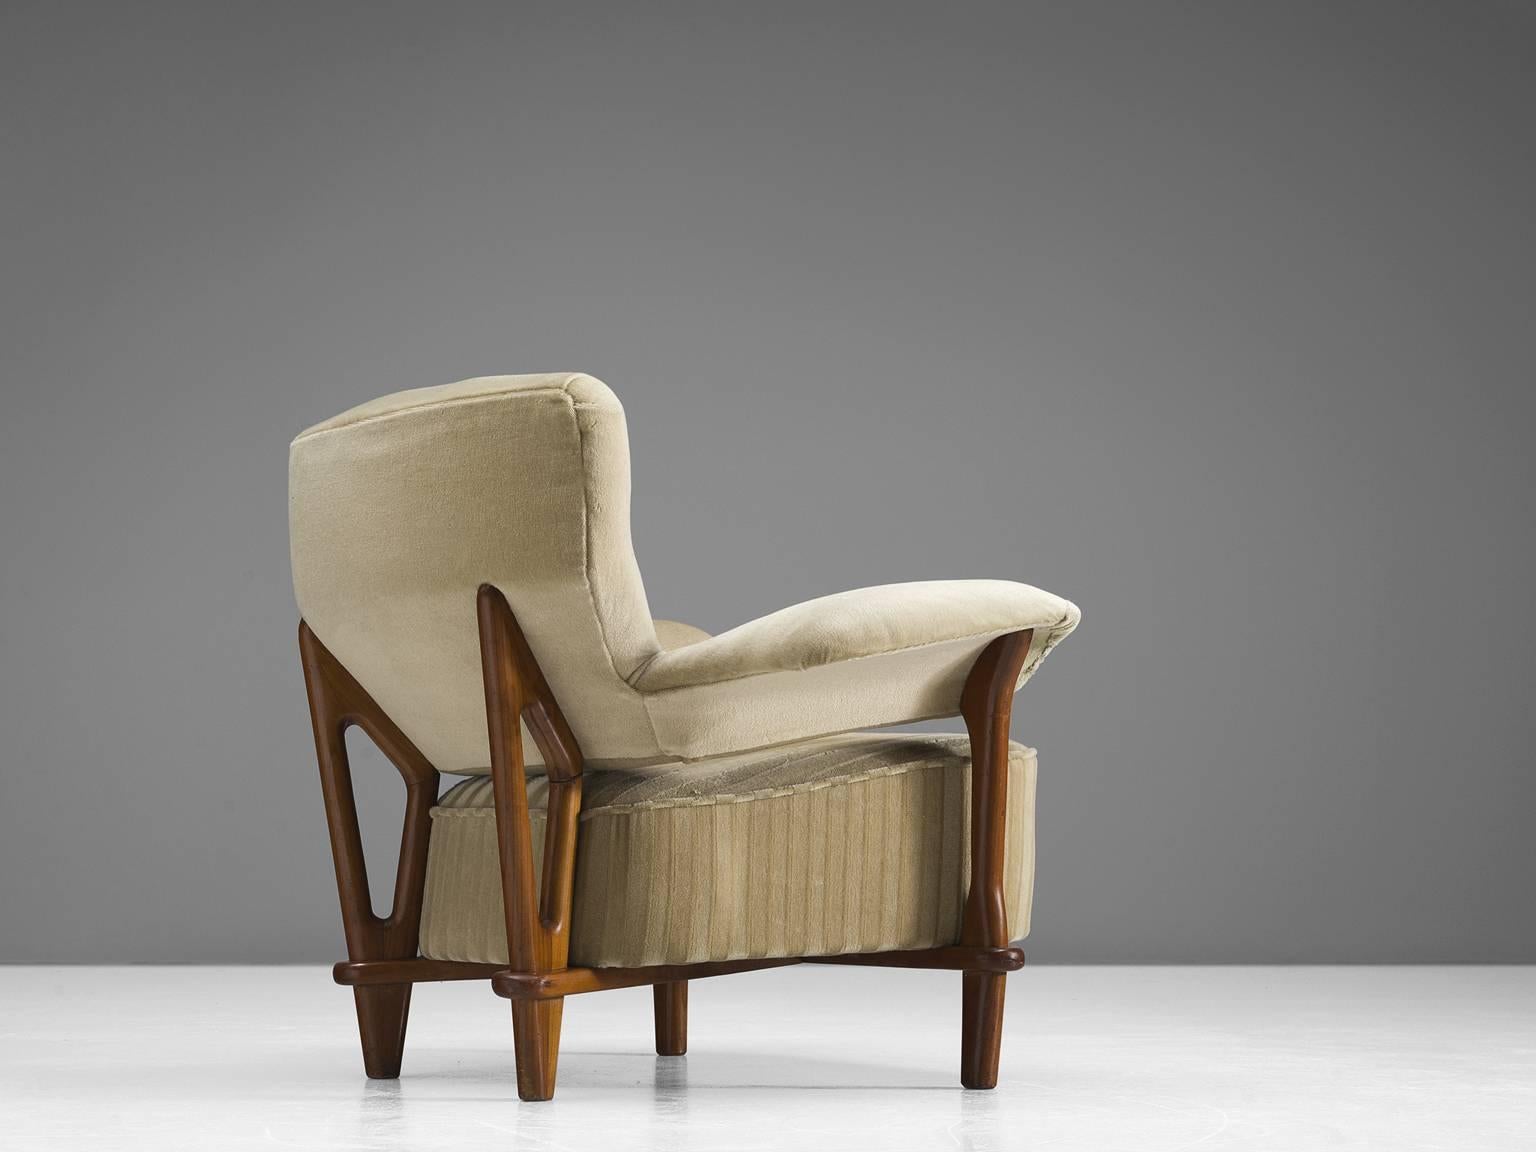 Armchair, velvet and oak, the Netherlands, 1950s.

This velvet, voluptuous armchair by Theo Ruth is a very strong singular item. The back flows with a natural grace into the armrests. The open gap between the backrest and the seating gives the